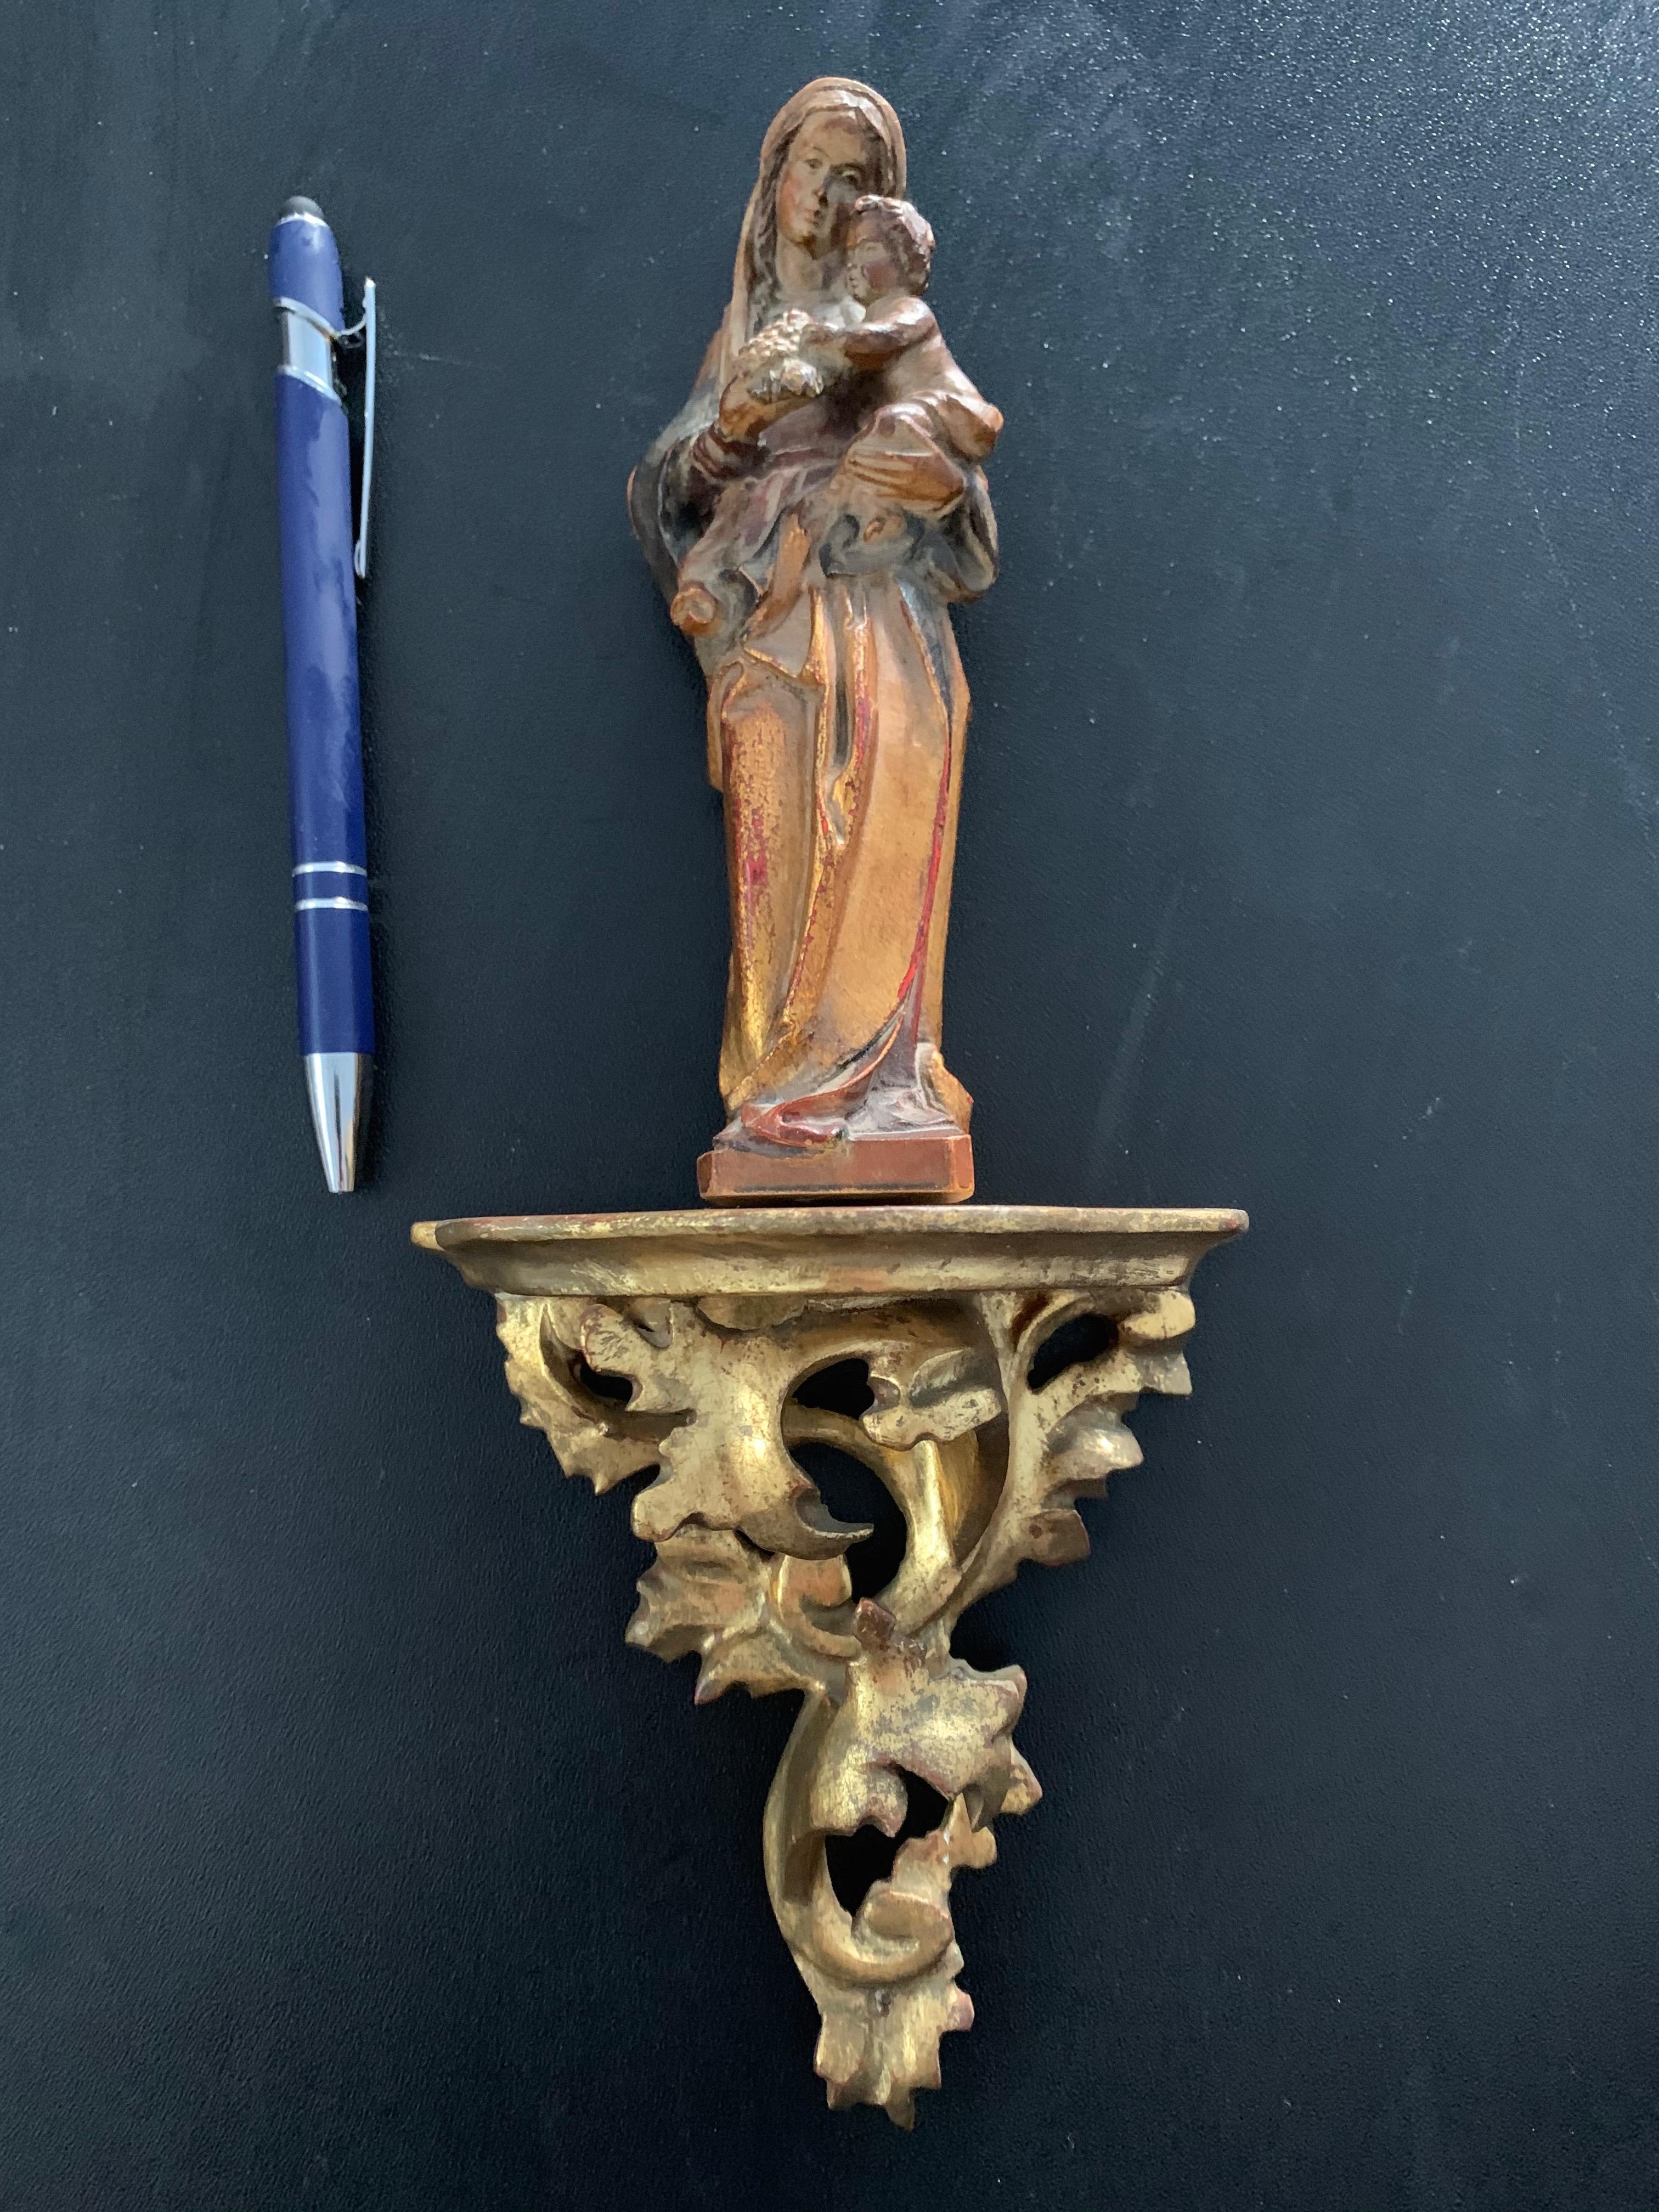 Hand painted and hand carved wooden sculpture of Holy Mary on a gilt Rococo style small bracket.

This Mother Mary and Child sculpture is gorgeous for its quality, its great colors, its warm patina and of course for what she stands for. This